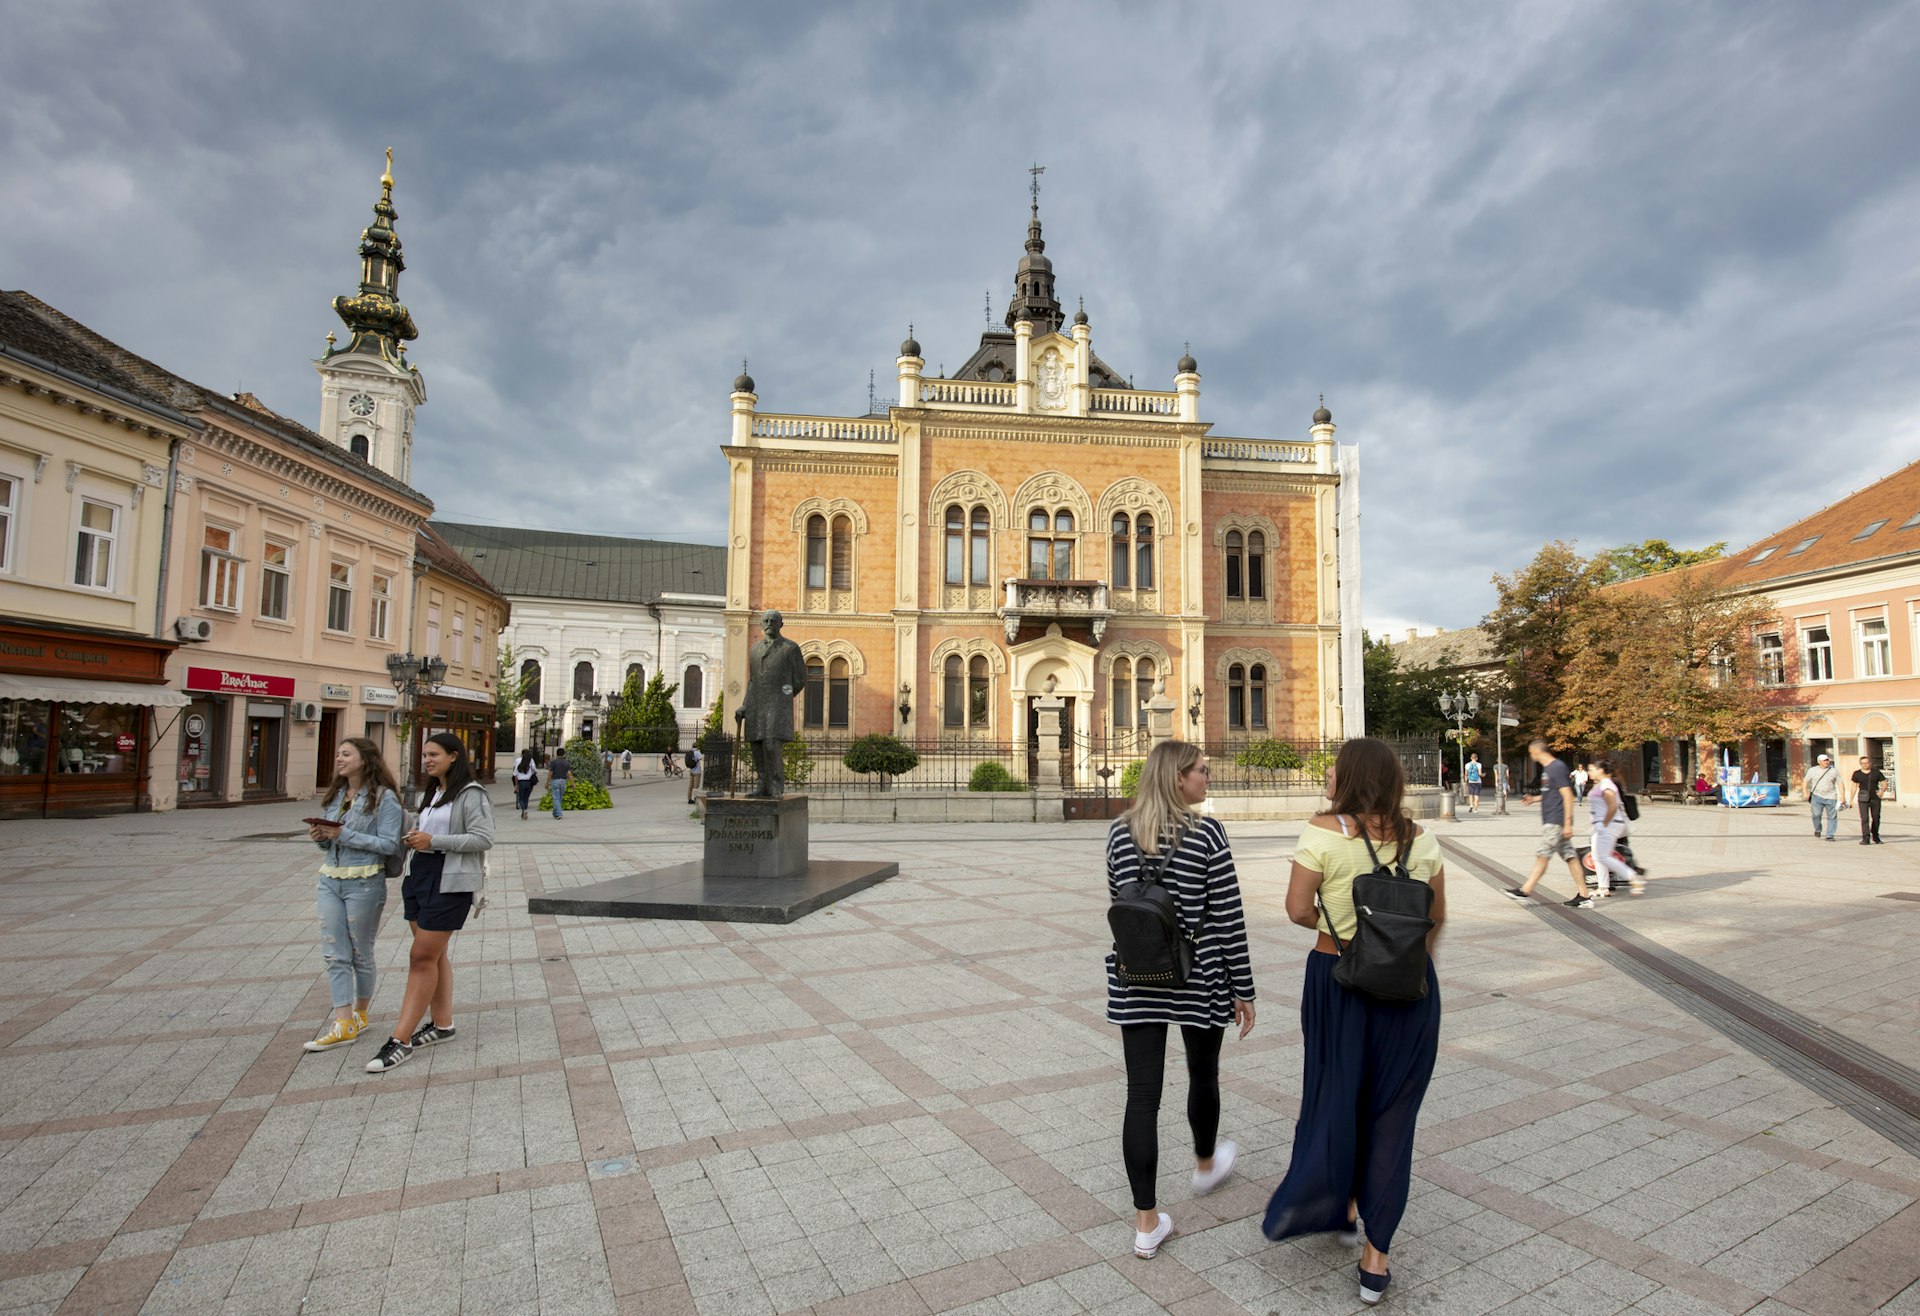 People walk across a square in front of a Baroque church building